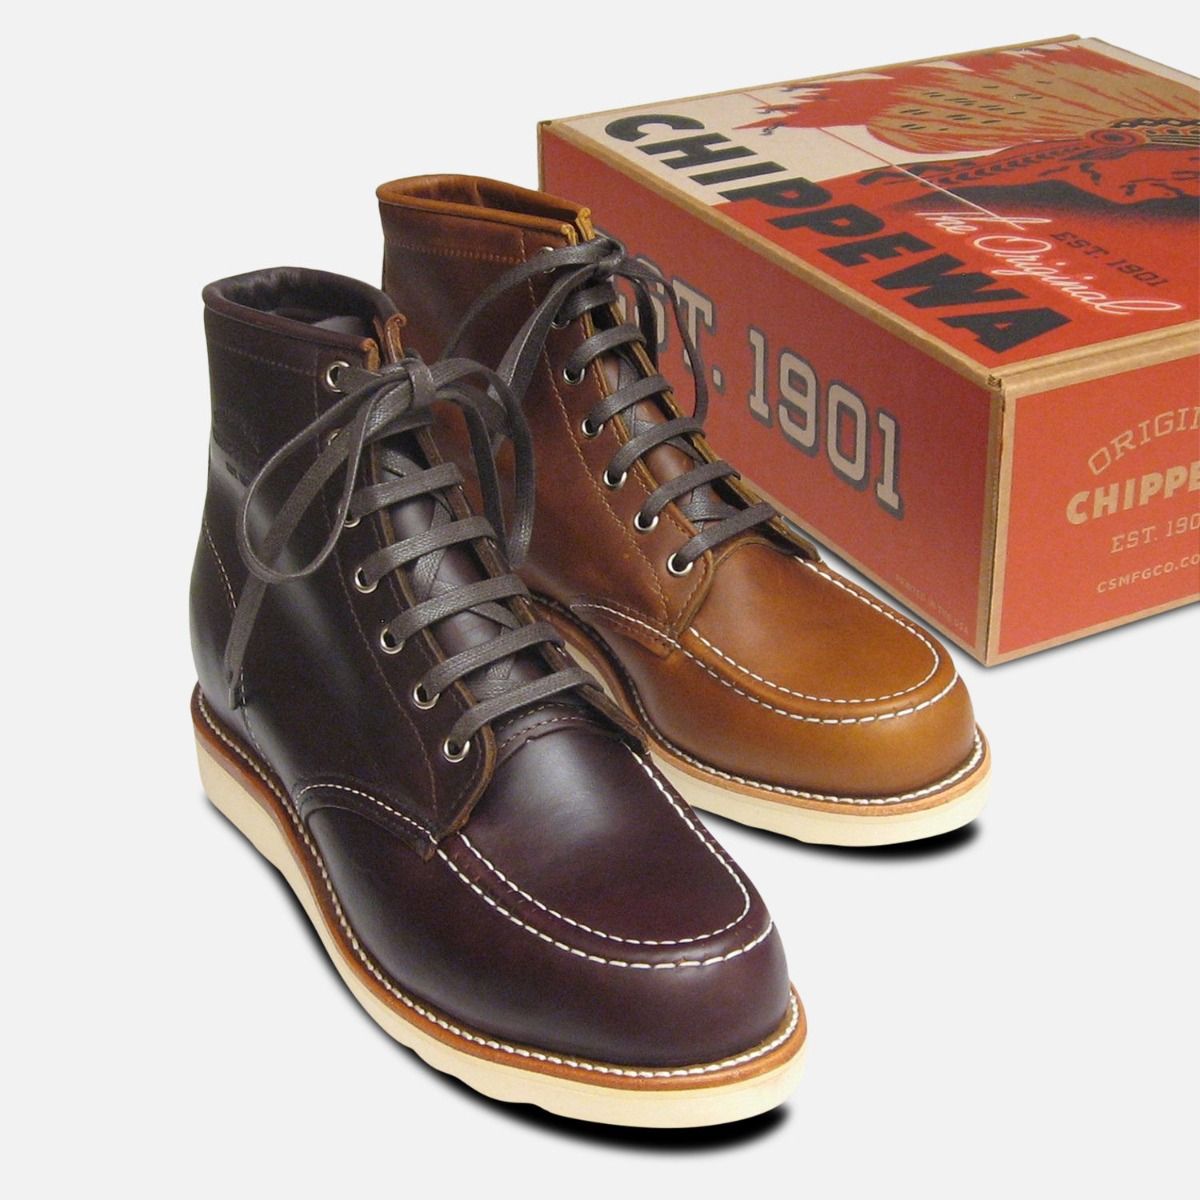 Chippewa Shoes Tan Renegade Leather 